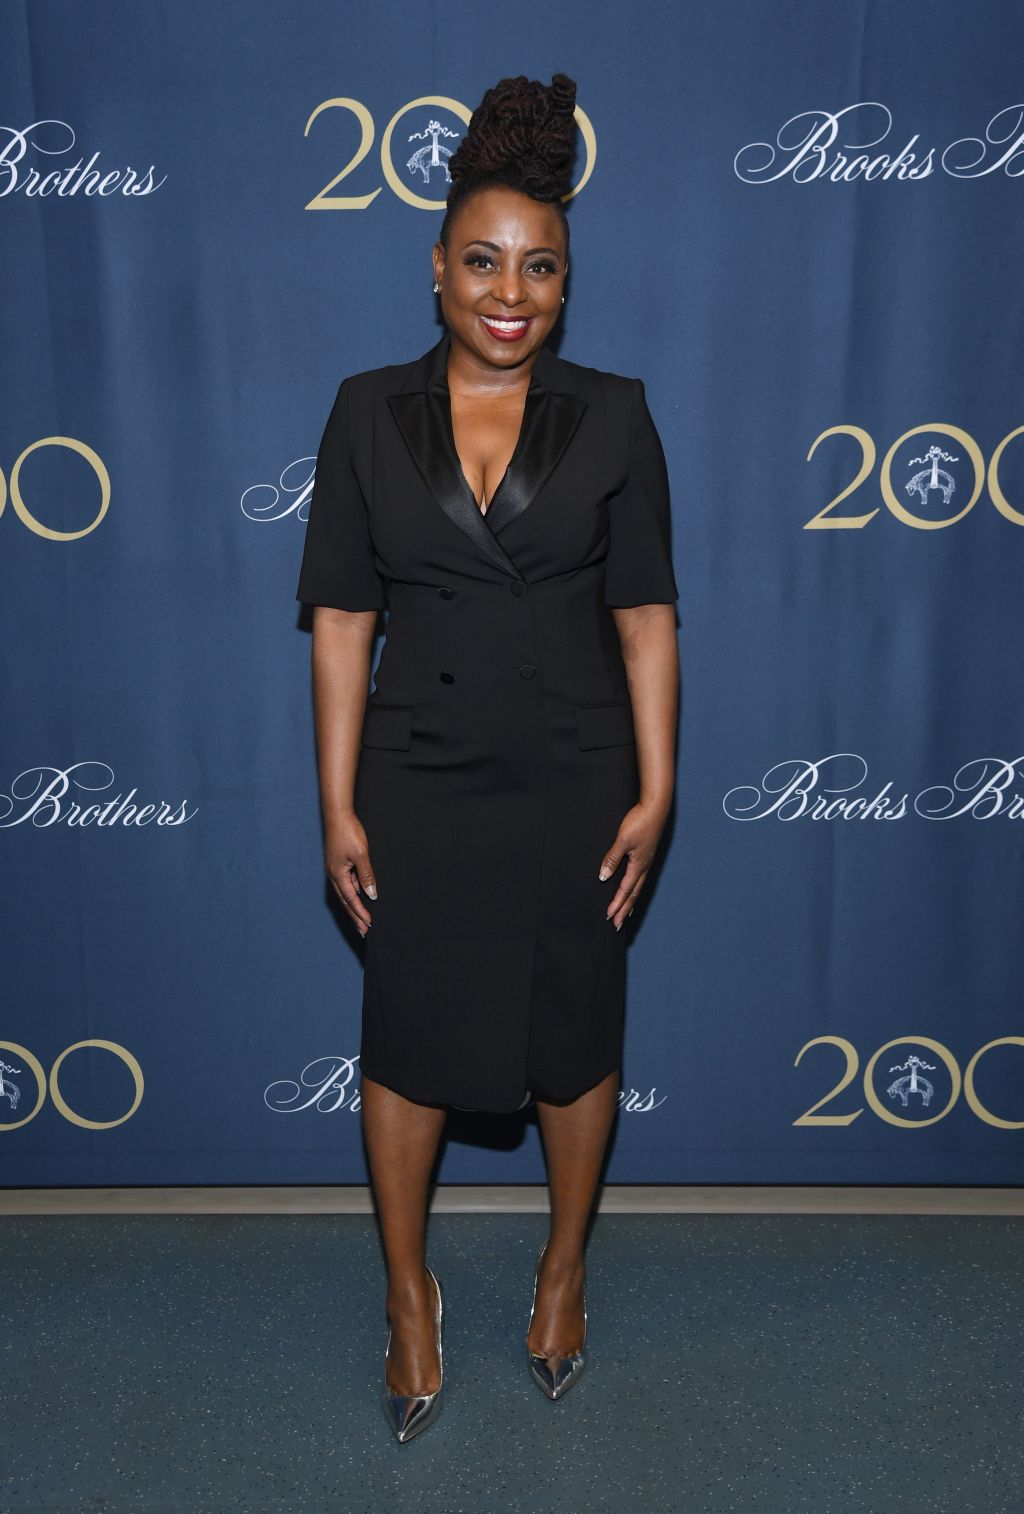 Brooks Brothers Bicentennial Celebration At Jazz At Lincoln Center, New York City